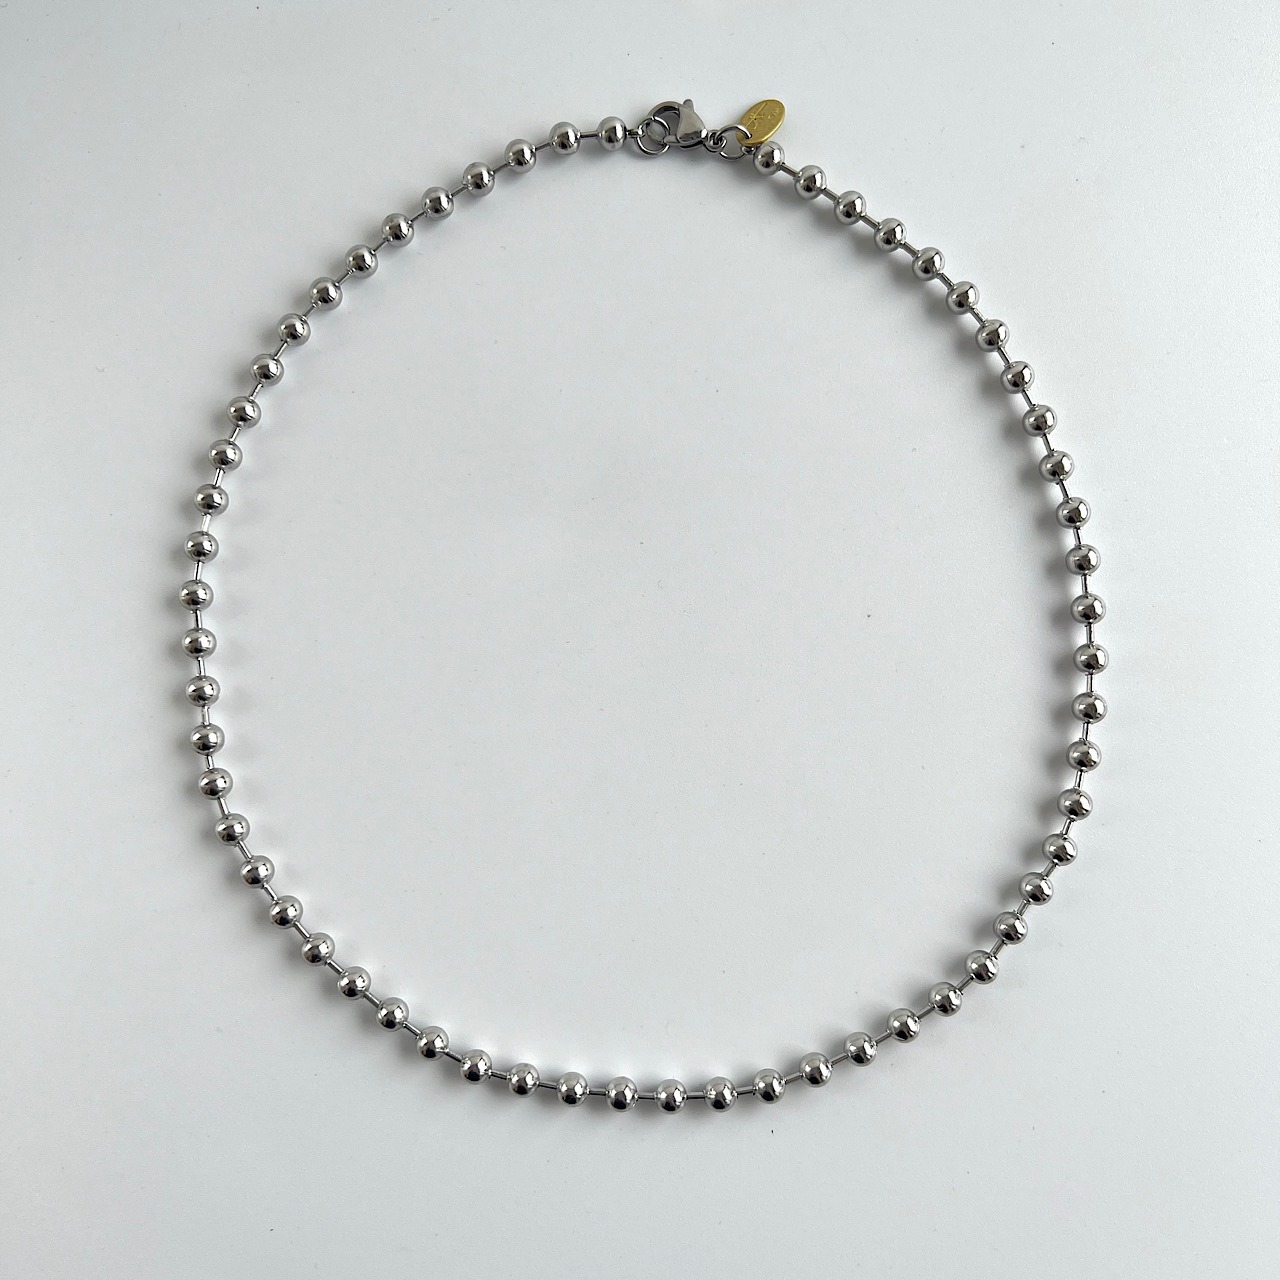 necklace 09